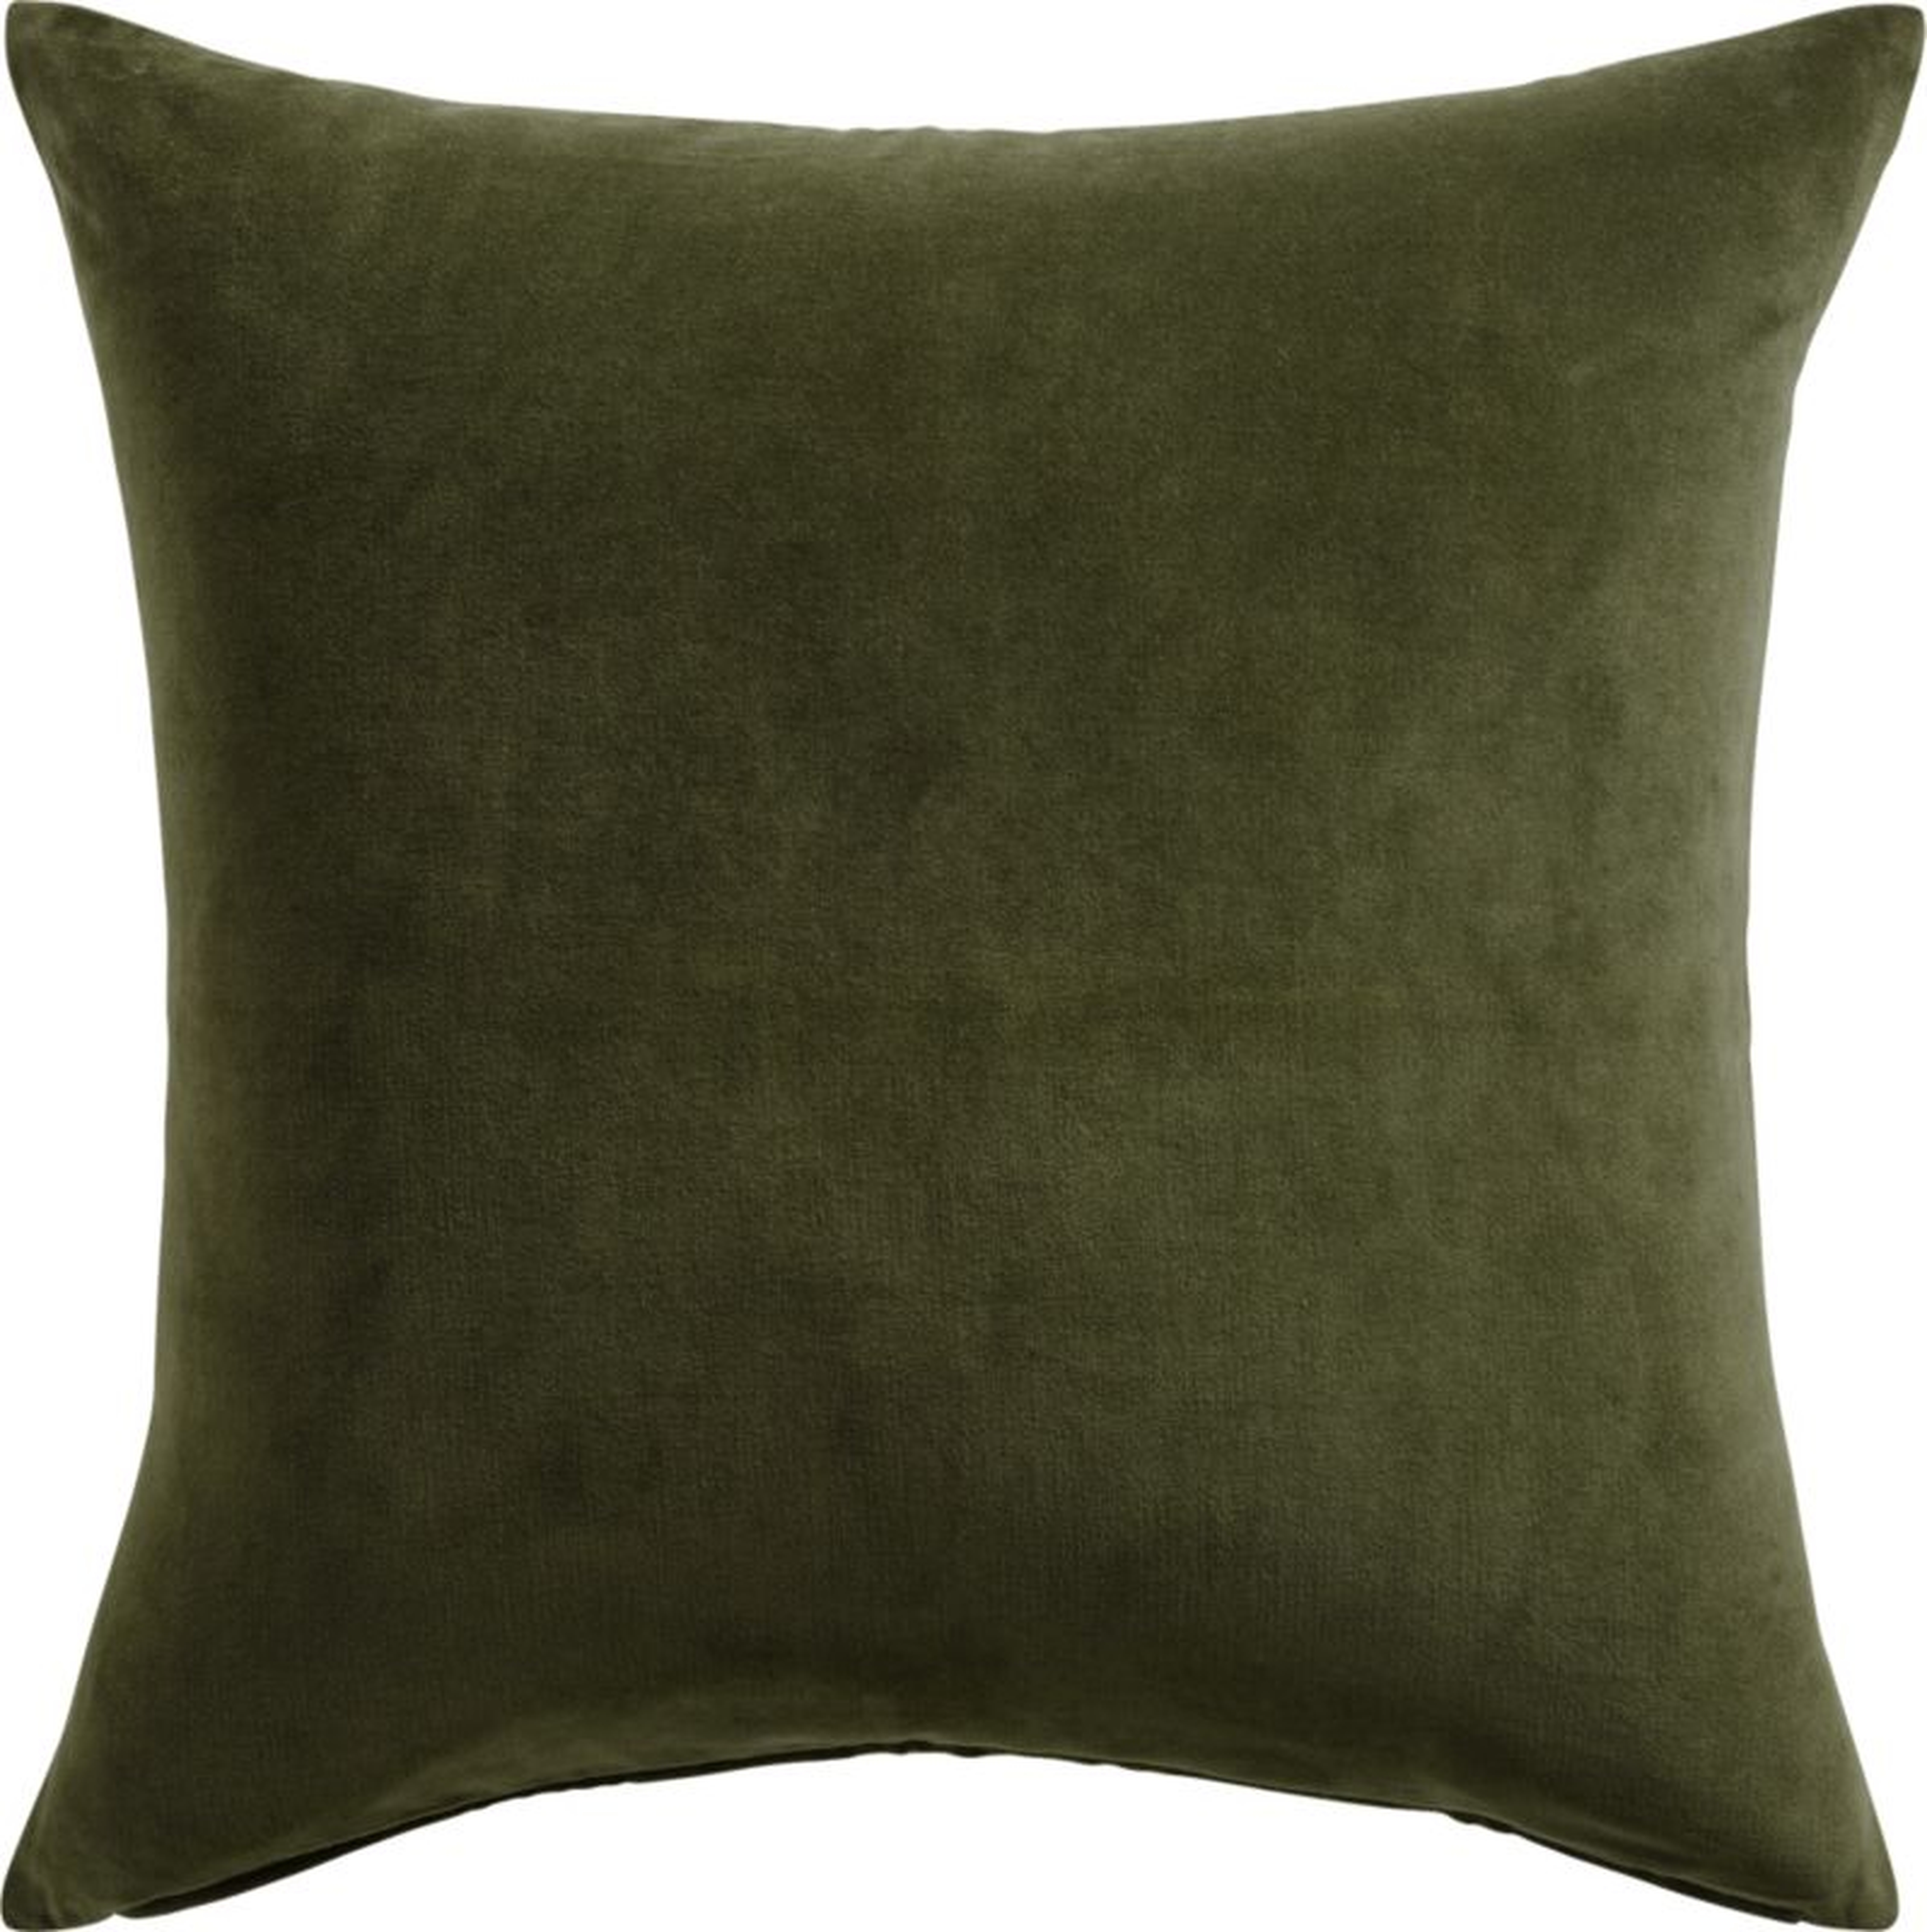 23" Leisure Olive Green Pillow with Down-Alternative Insert - CB2